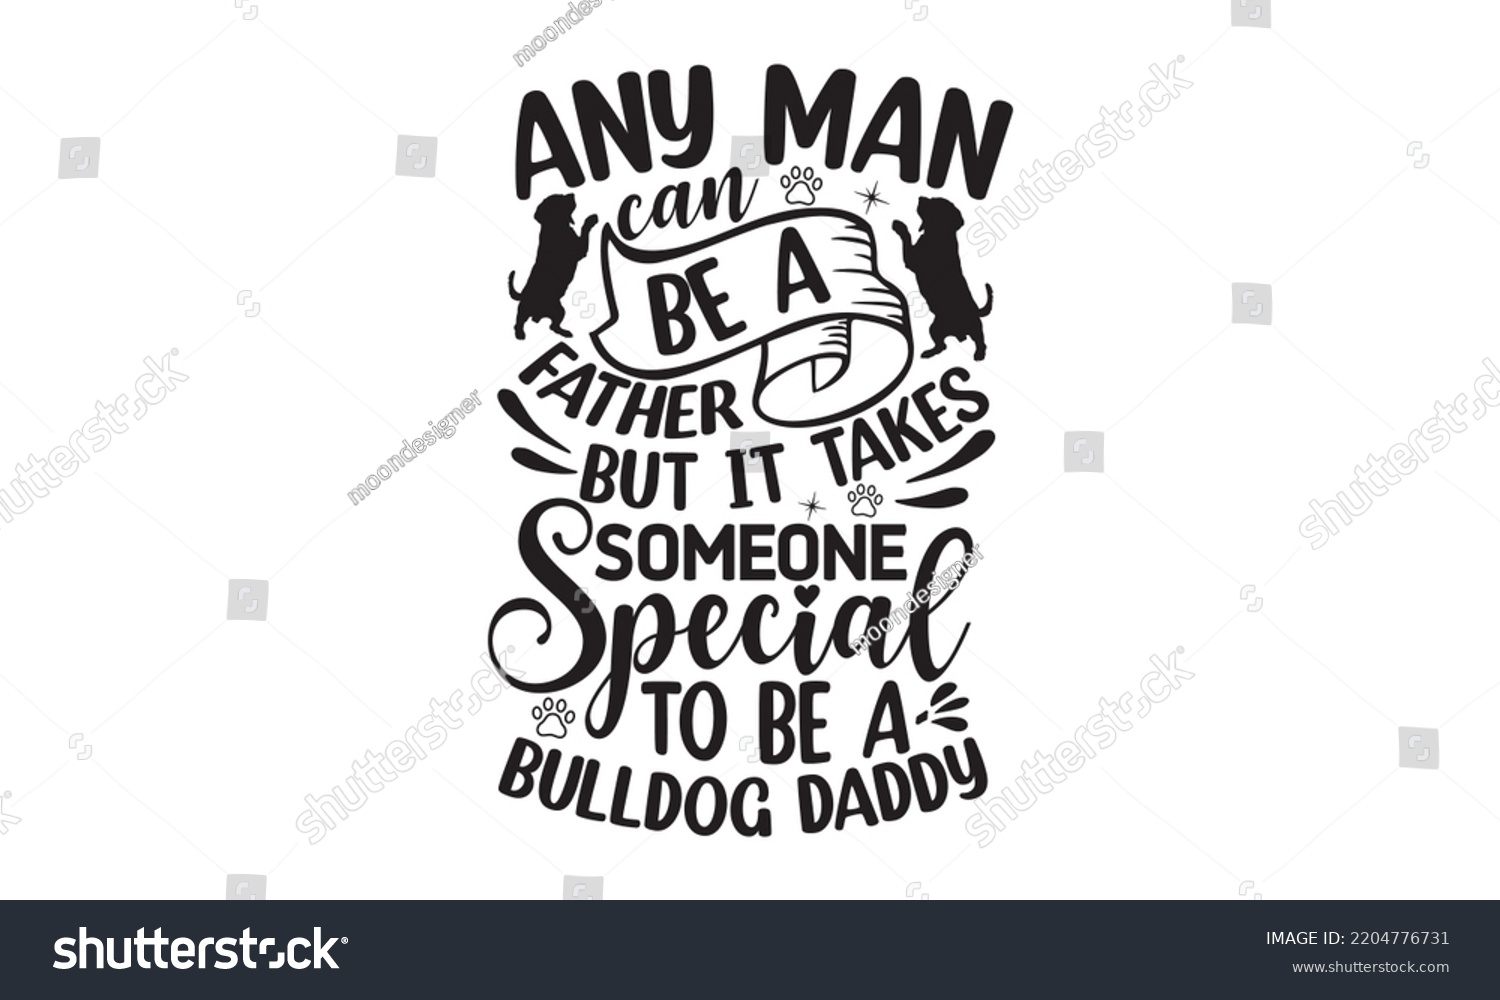 SVG of Any man can be a father but it takes someone special to be a bulldog daddy - Bullodog T-shirt and SVG Design,  Dog lover t shirt design gift for women, typography design, can you download this Design svg